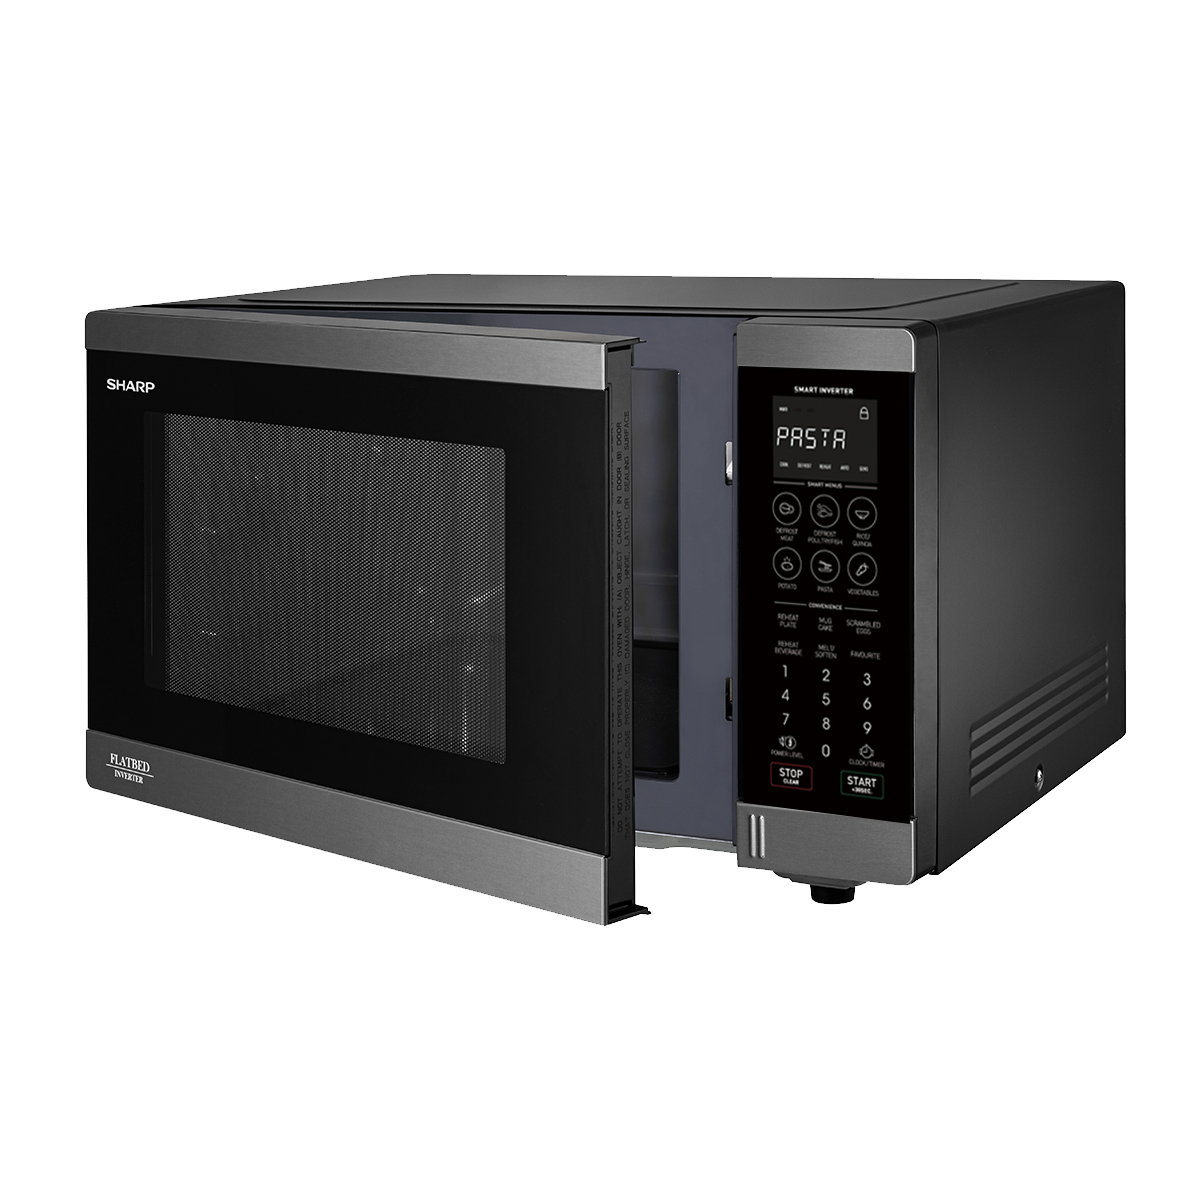 Flatbed Microwave 1200W - Black Stainless Steel